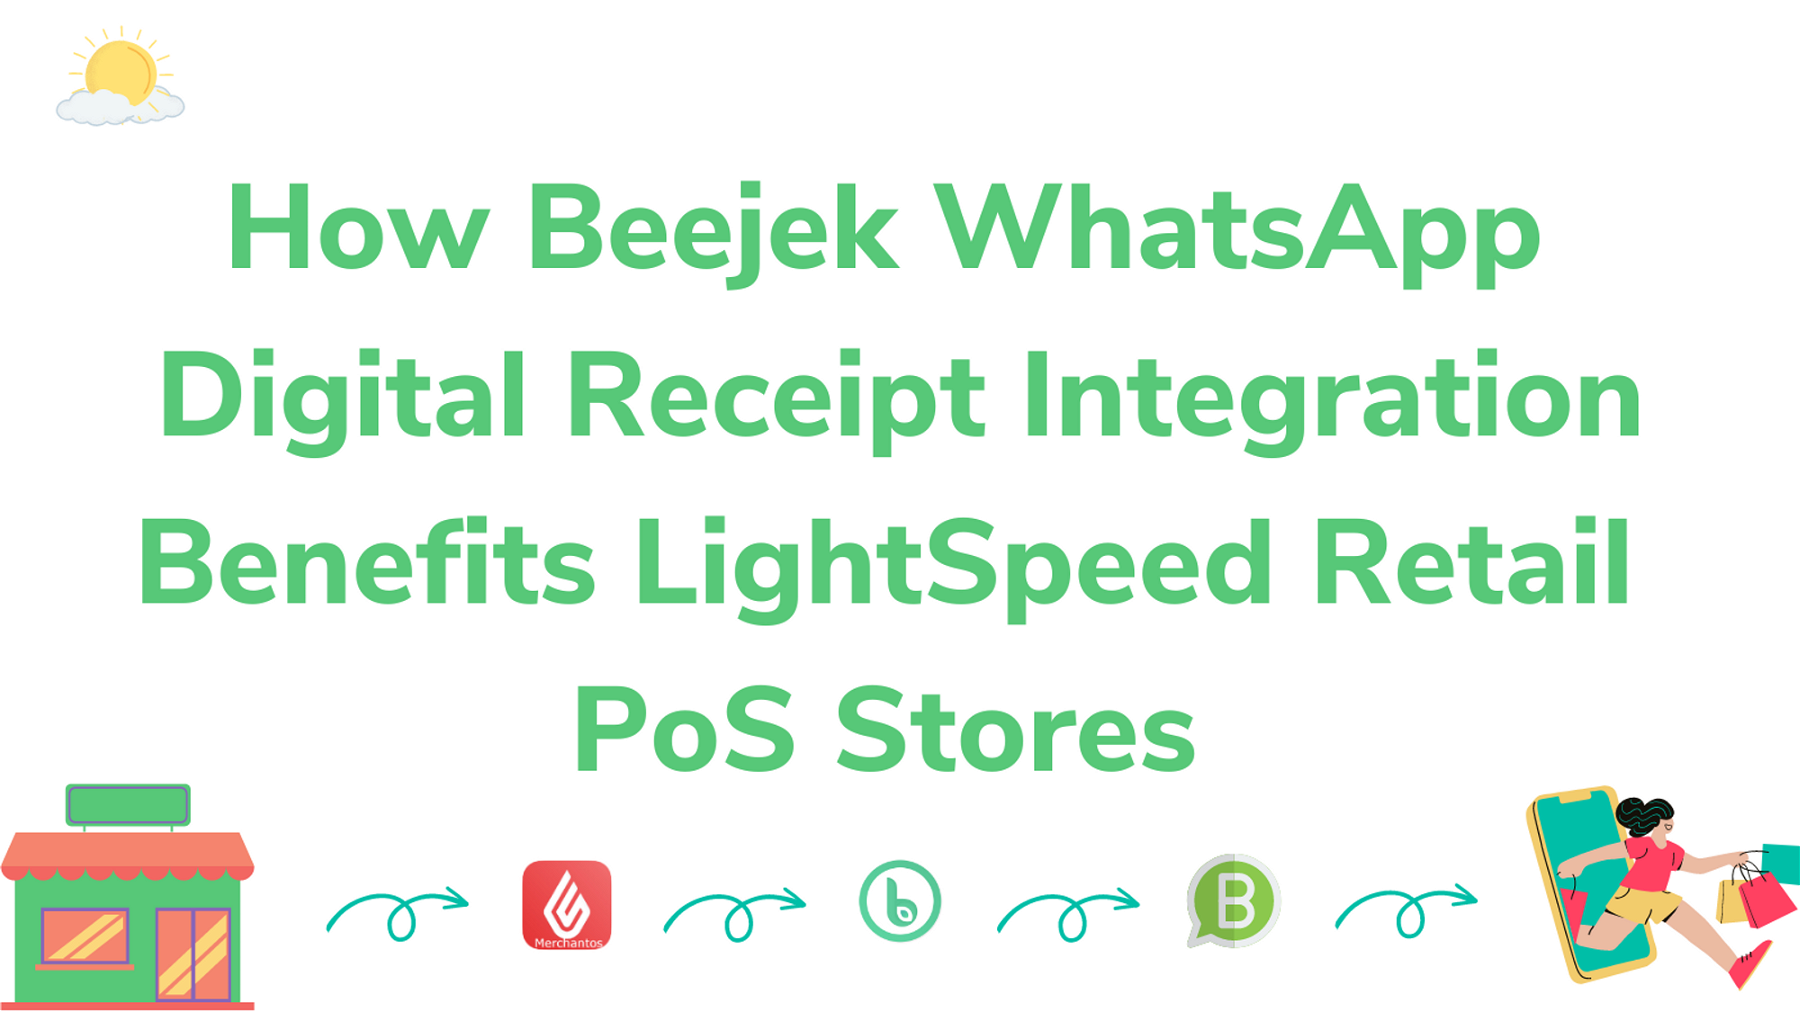 How WhatsApp Receipts helps LightSpeed Retail PoS Stores?